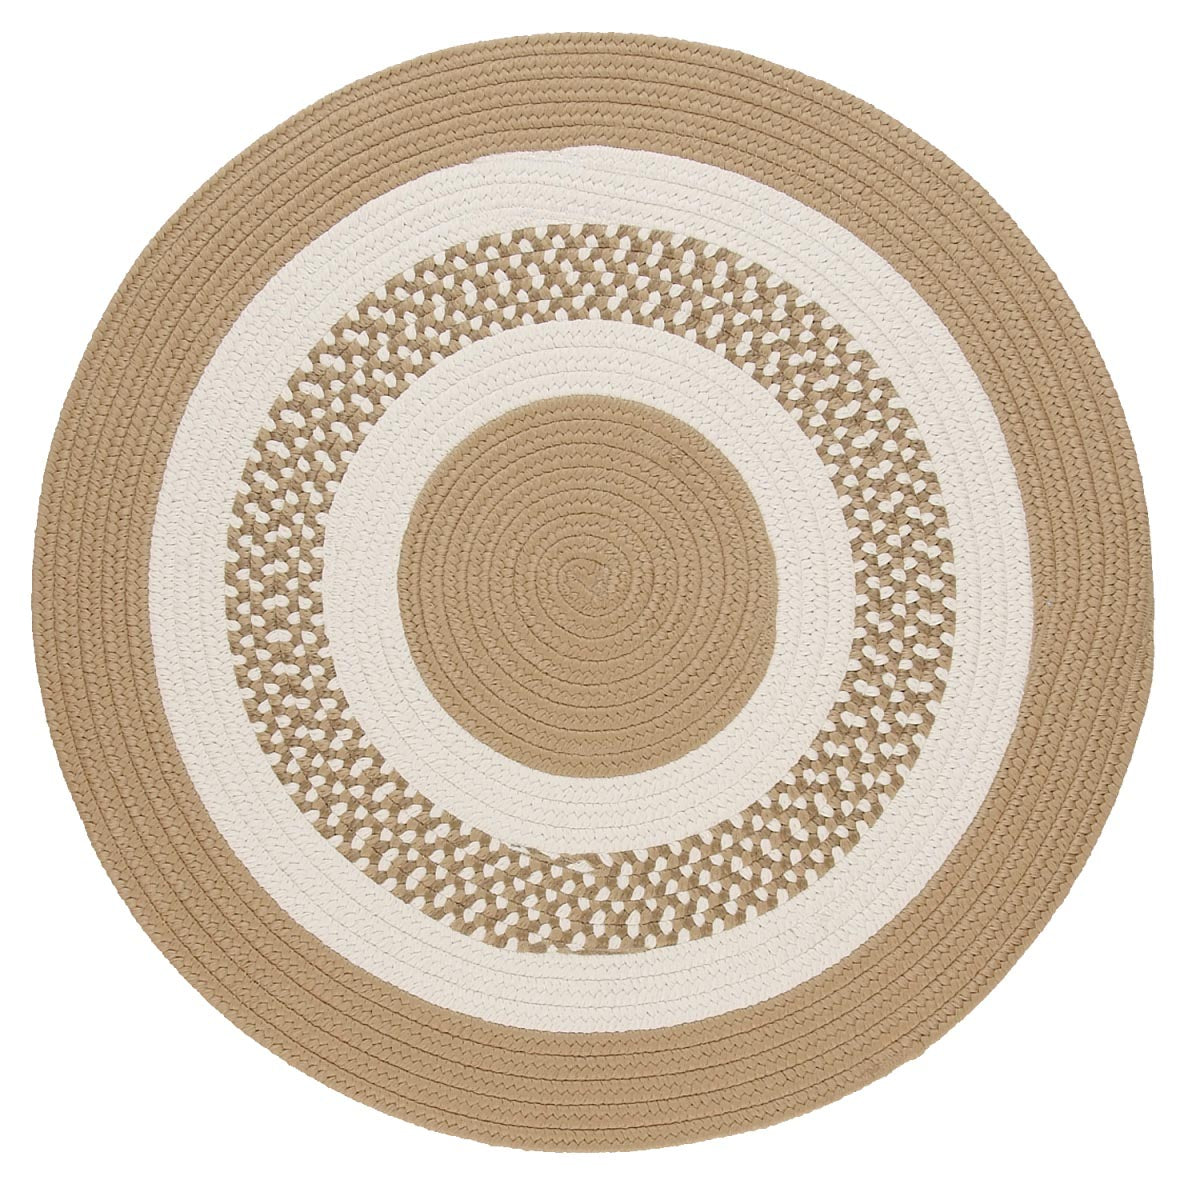 Flowers Bay Cuban Sand Outdoor Braided Round Rugs